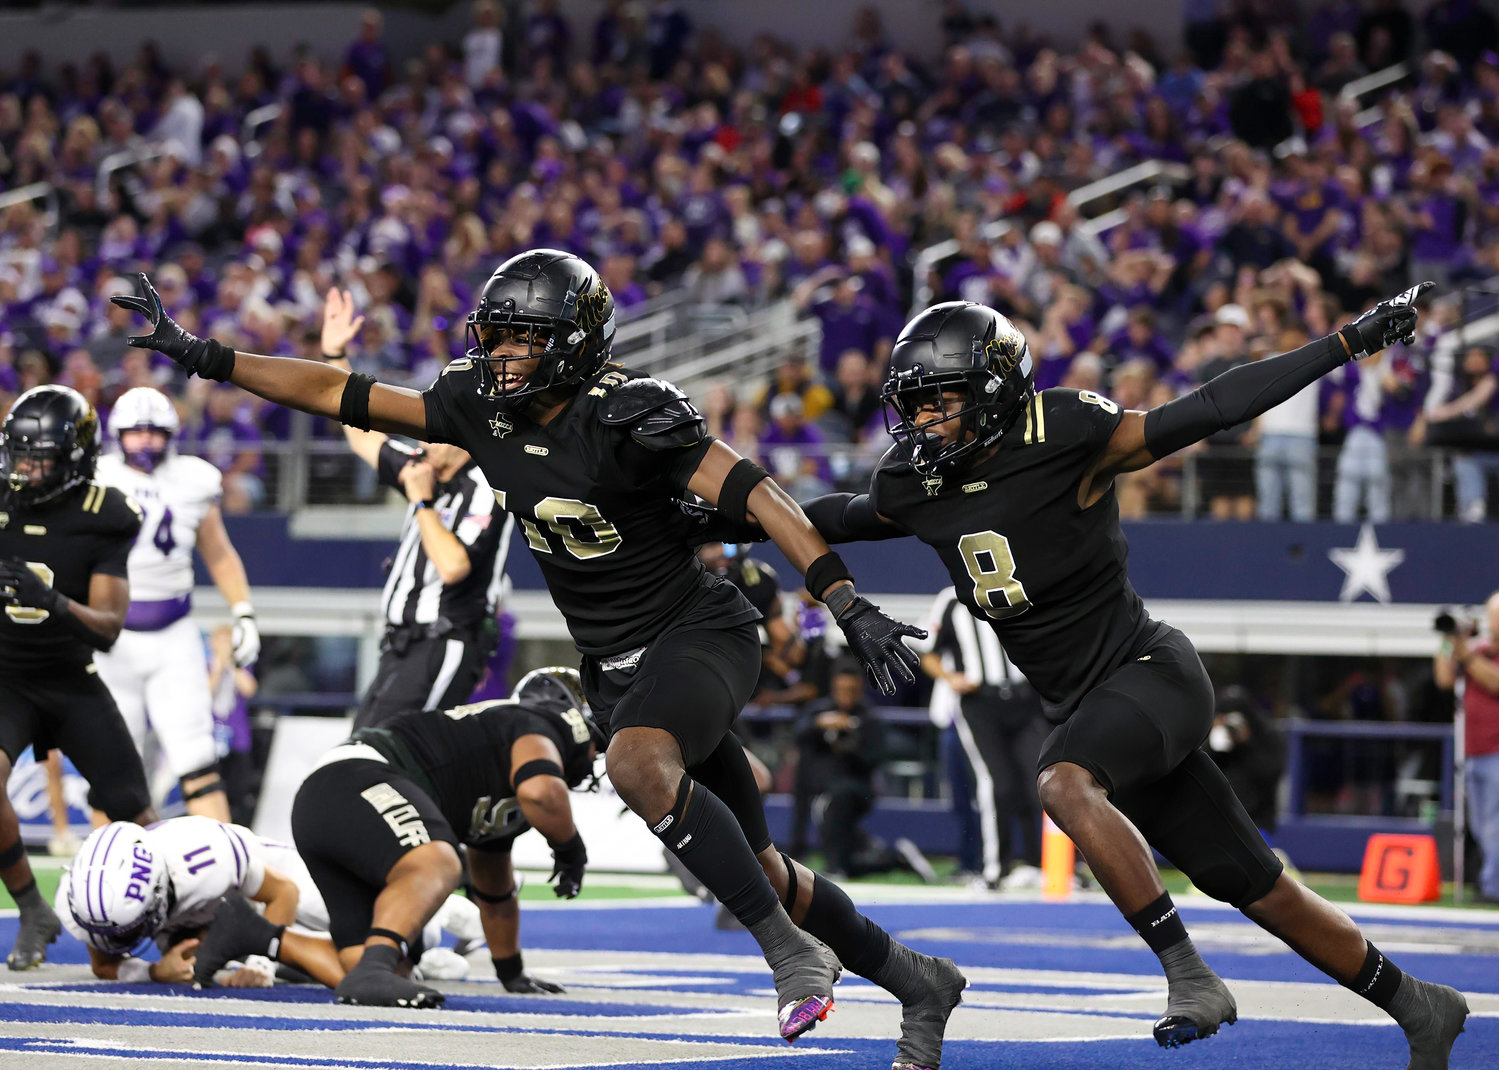 The South Oak Cliff defense celebrates after sacking Port Neches-Groves quarterback Cole Crippen (11) during the Class 5A Division II football state championship game between South Oak Cliff and Port Neches-Groves in Arlington, Texas, on Dec. 16, 2022.